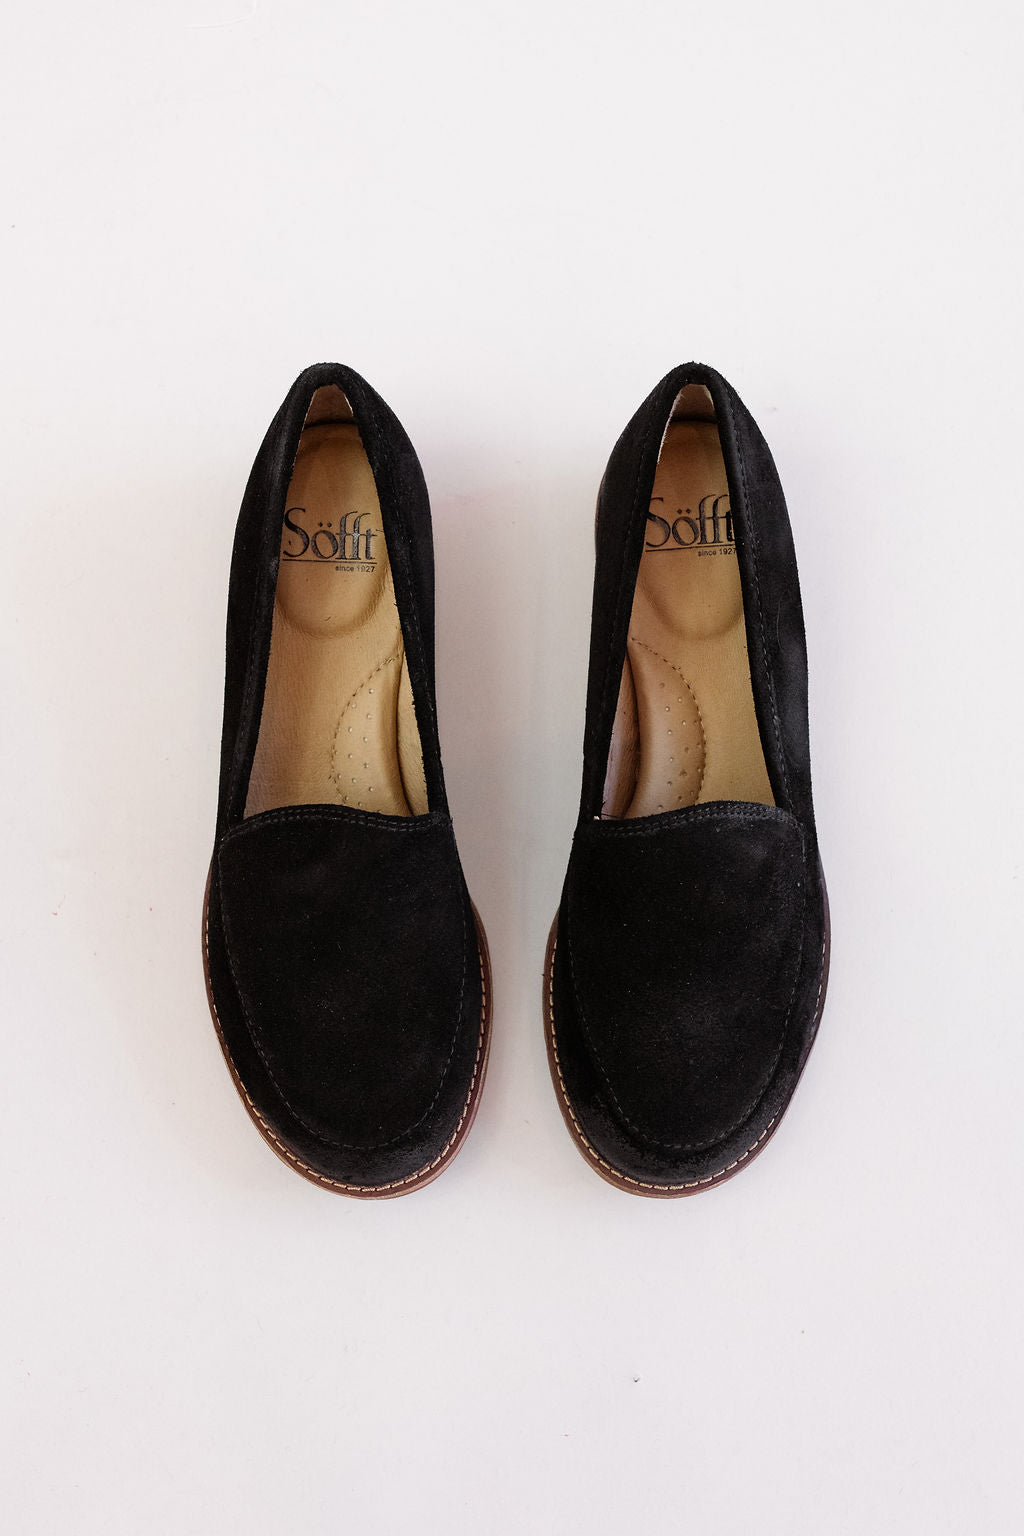 Sofft | Napoli Loafer | Black Suede - Poppy and Stella